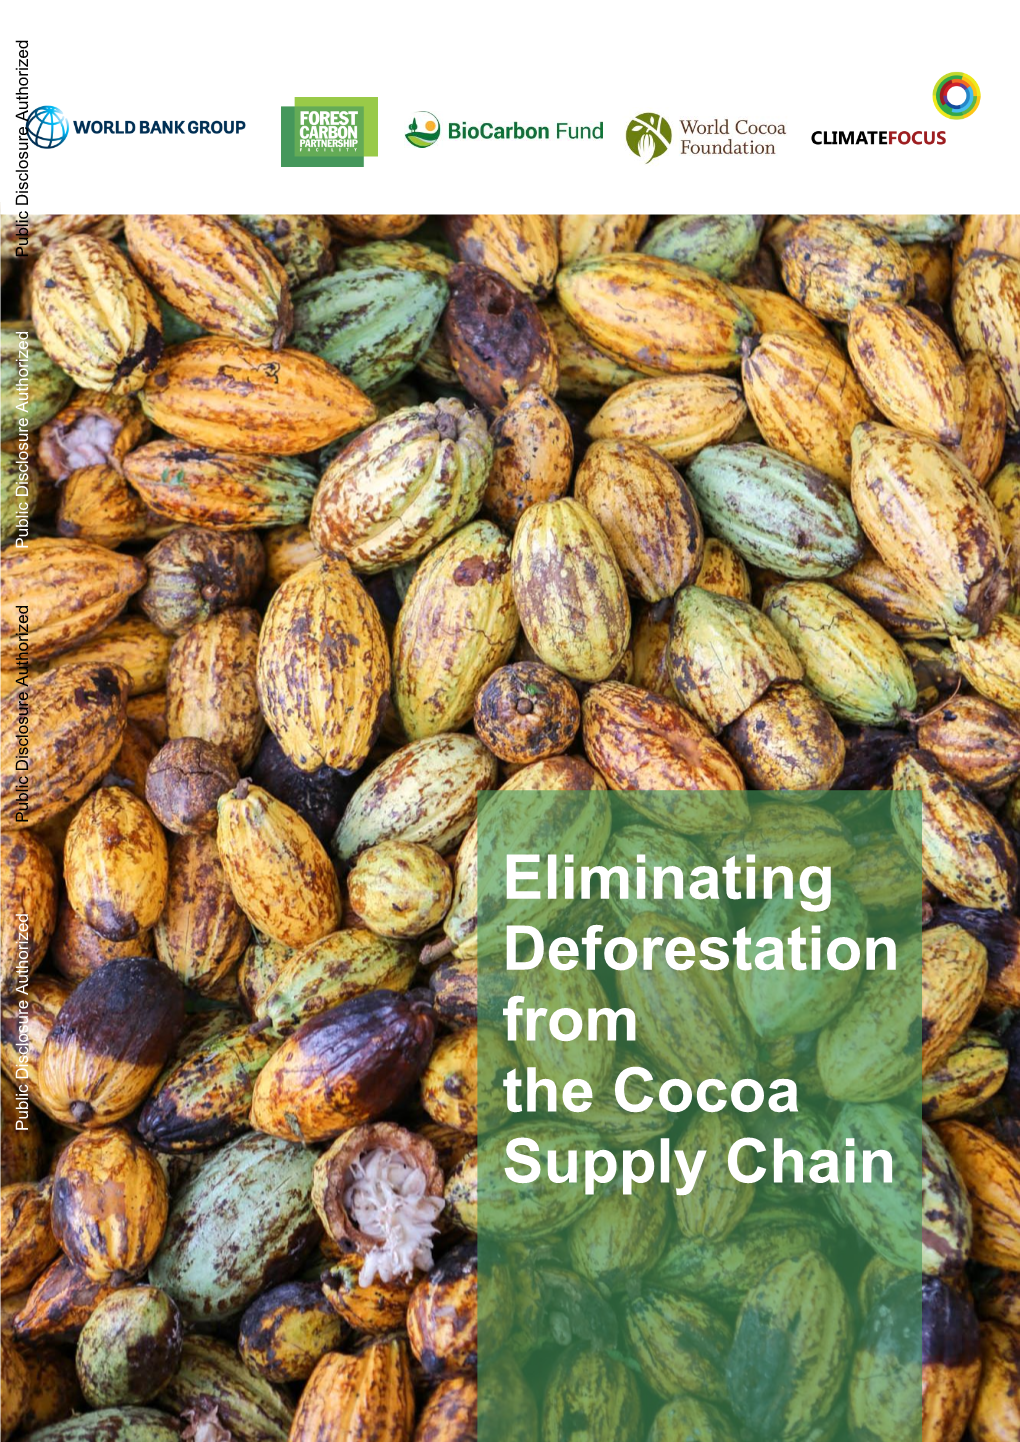 Eliminating Deforestation from the Cocoa Public Disclosure Authorized Supply Chain